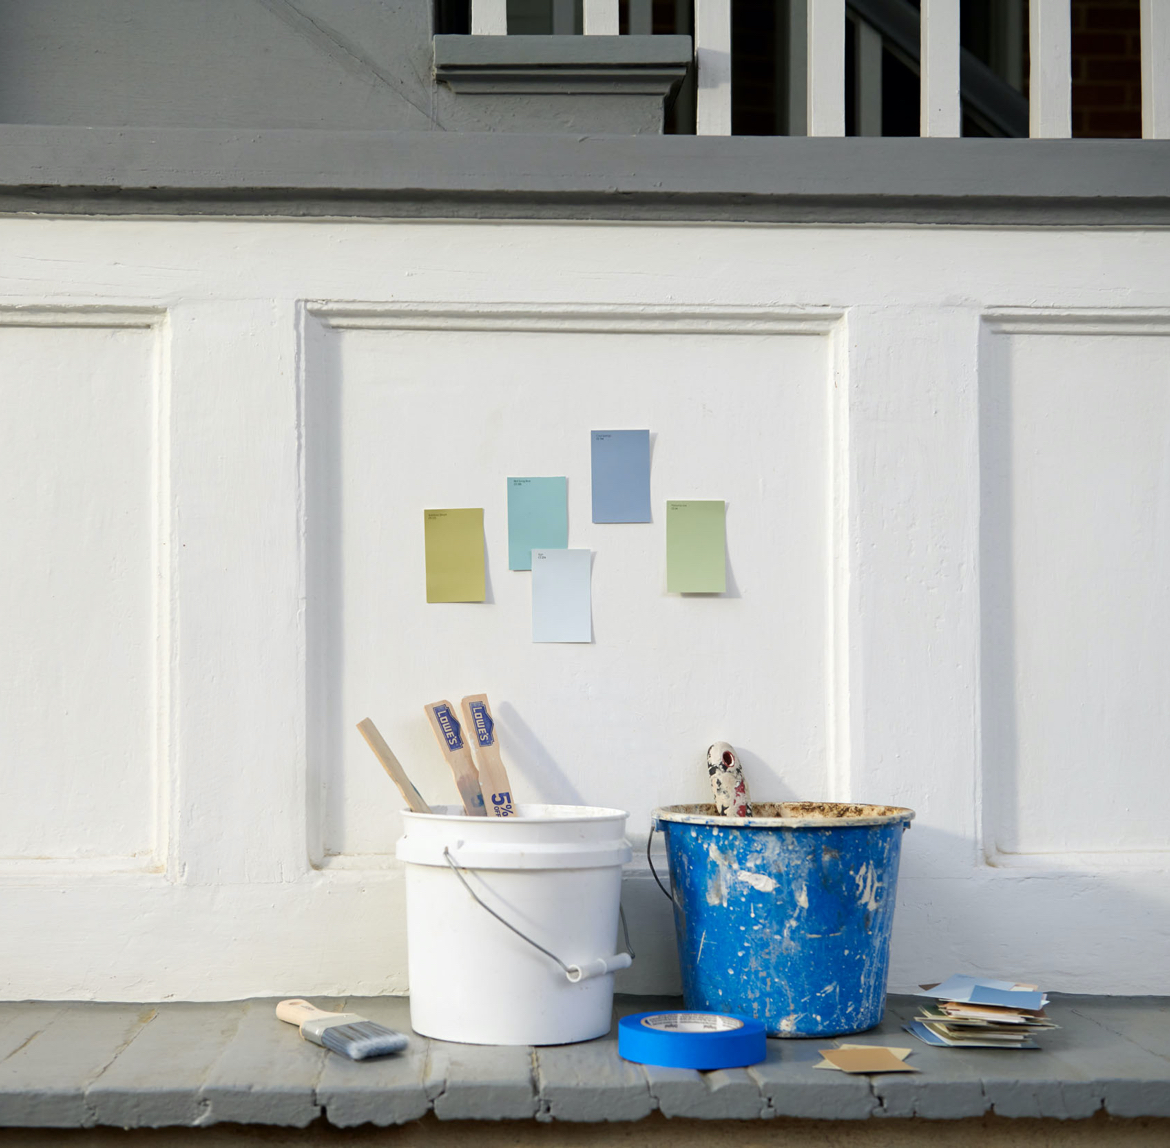 Valspar V018-1 Dainty Daisy Precisely Matched For Paint and Spray